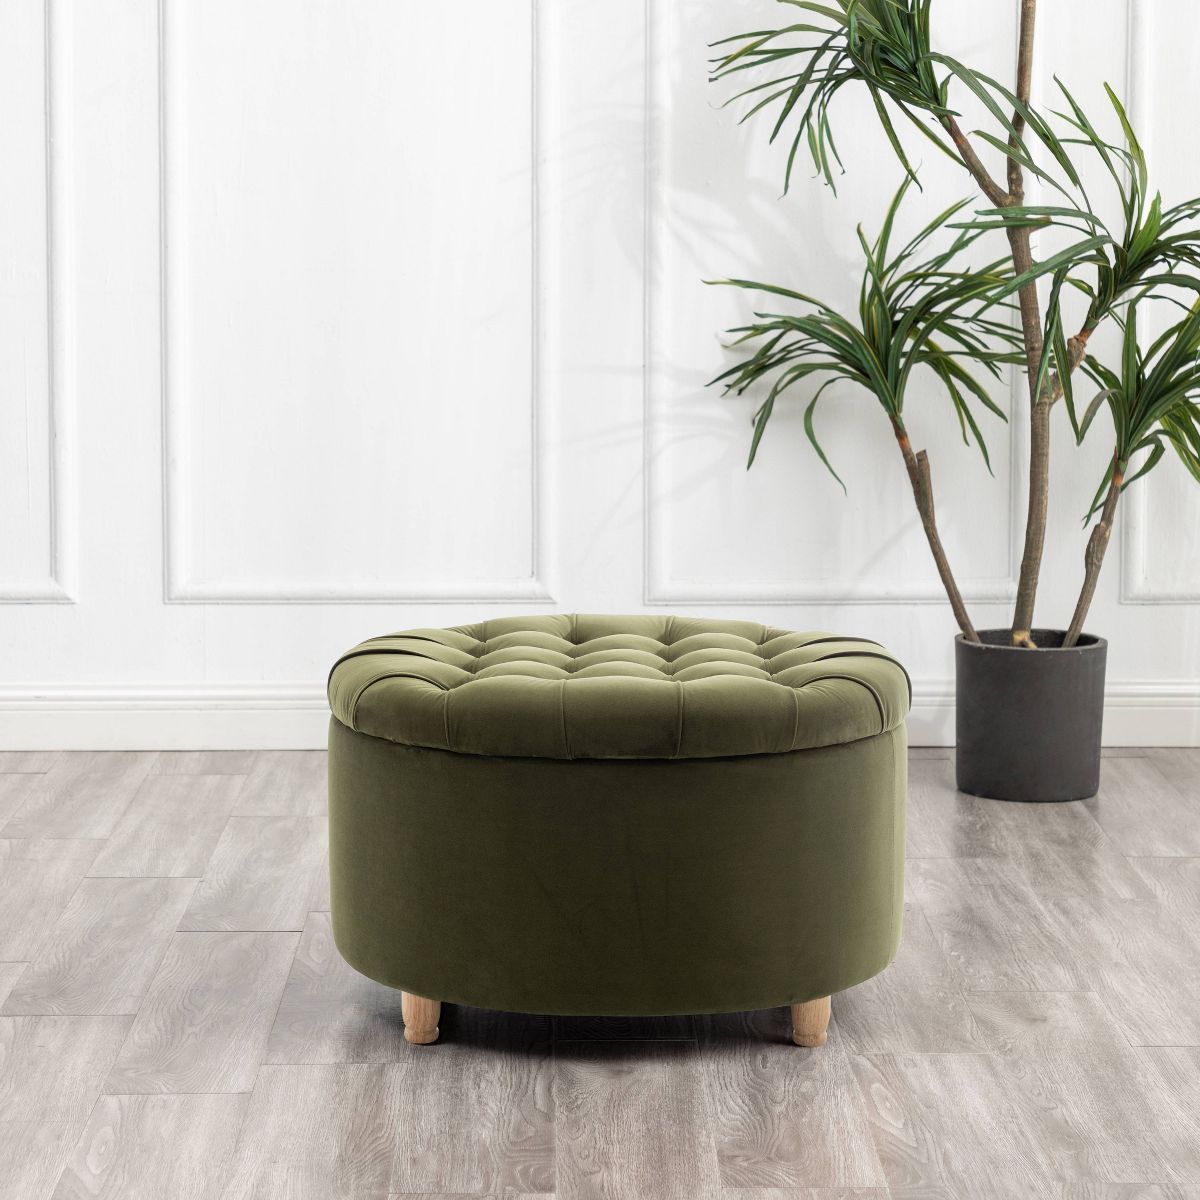 Large Round Tufted Storage Ottoman with Lift Off Lid - WOVENBYRD | Target